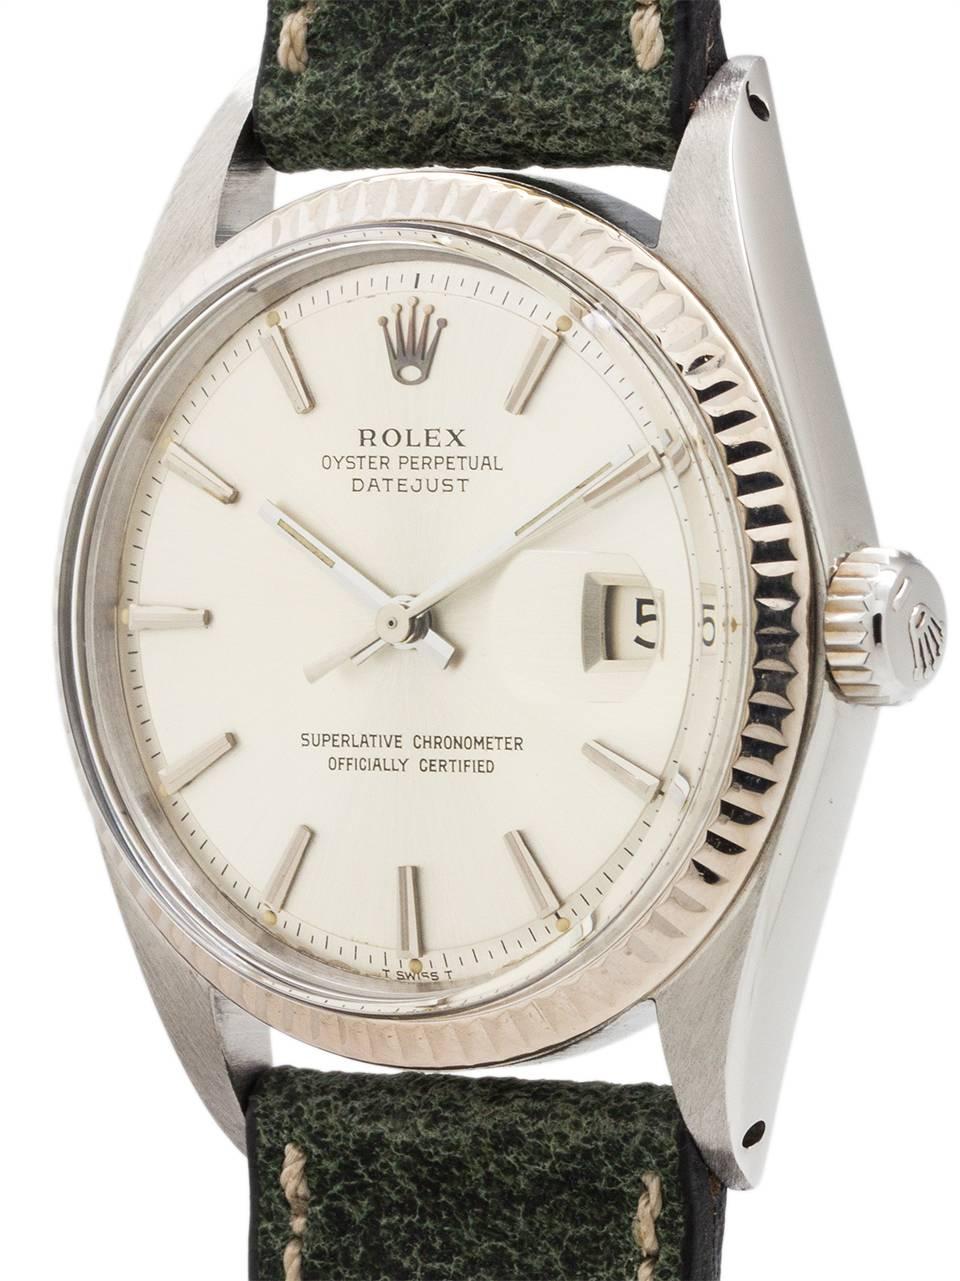 Rolex stainless steel Datejust ref 1601 serial number 2.3 million circa 1970. Featuring 36mm diameter Oyster case with 14K WG fluted bezel, acrylic crystal and signed crown. Lovely original silver satin dial with applied indexes and baton hands.